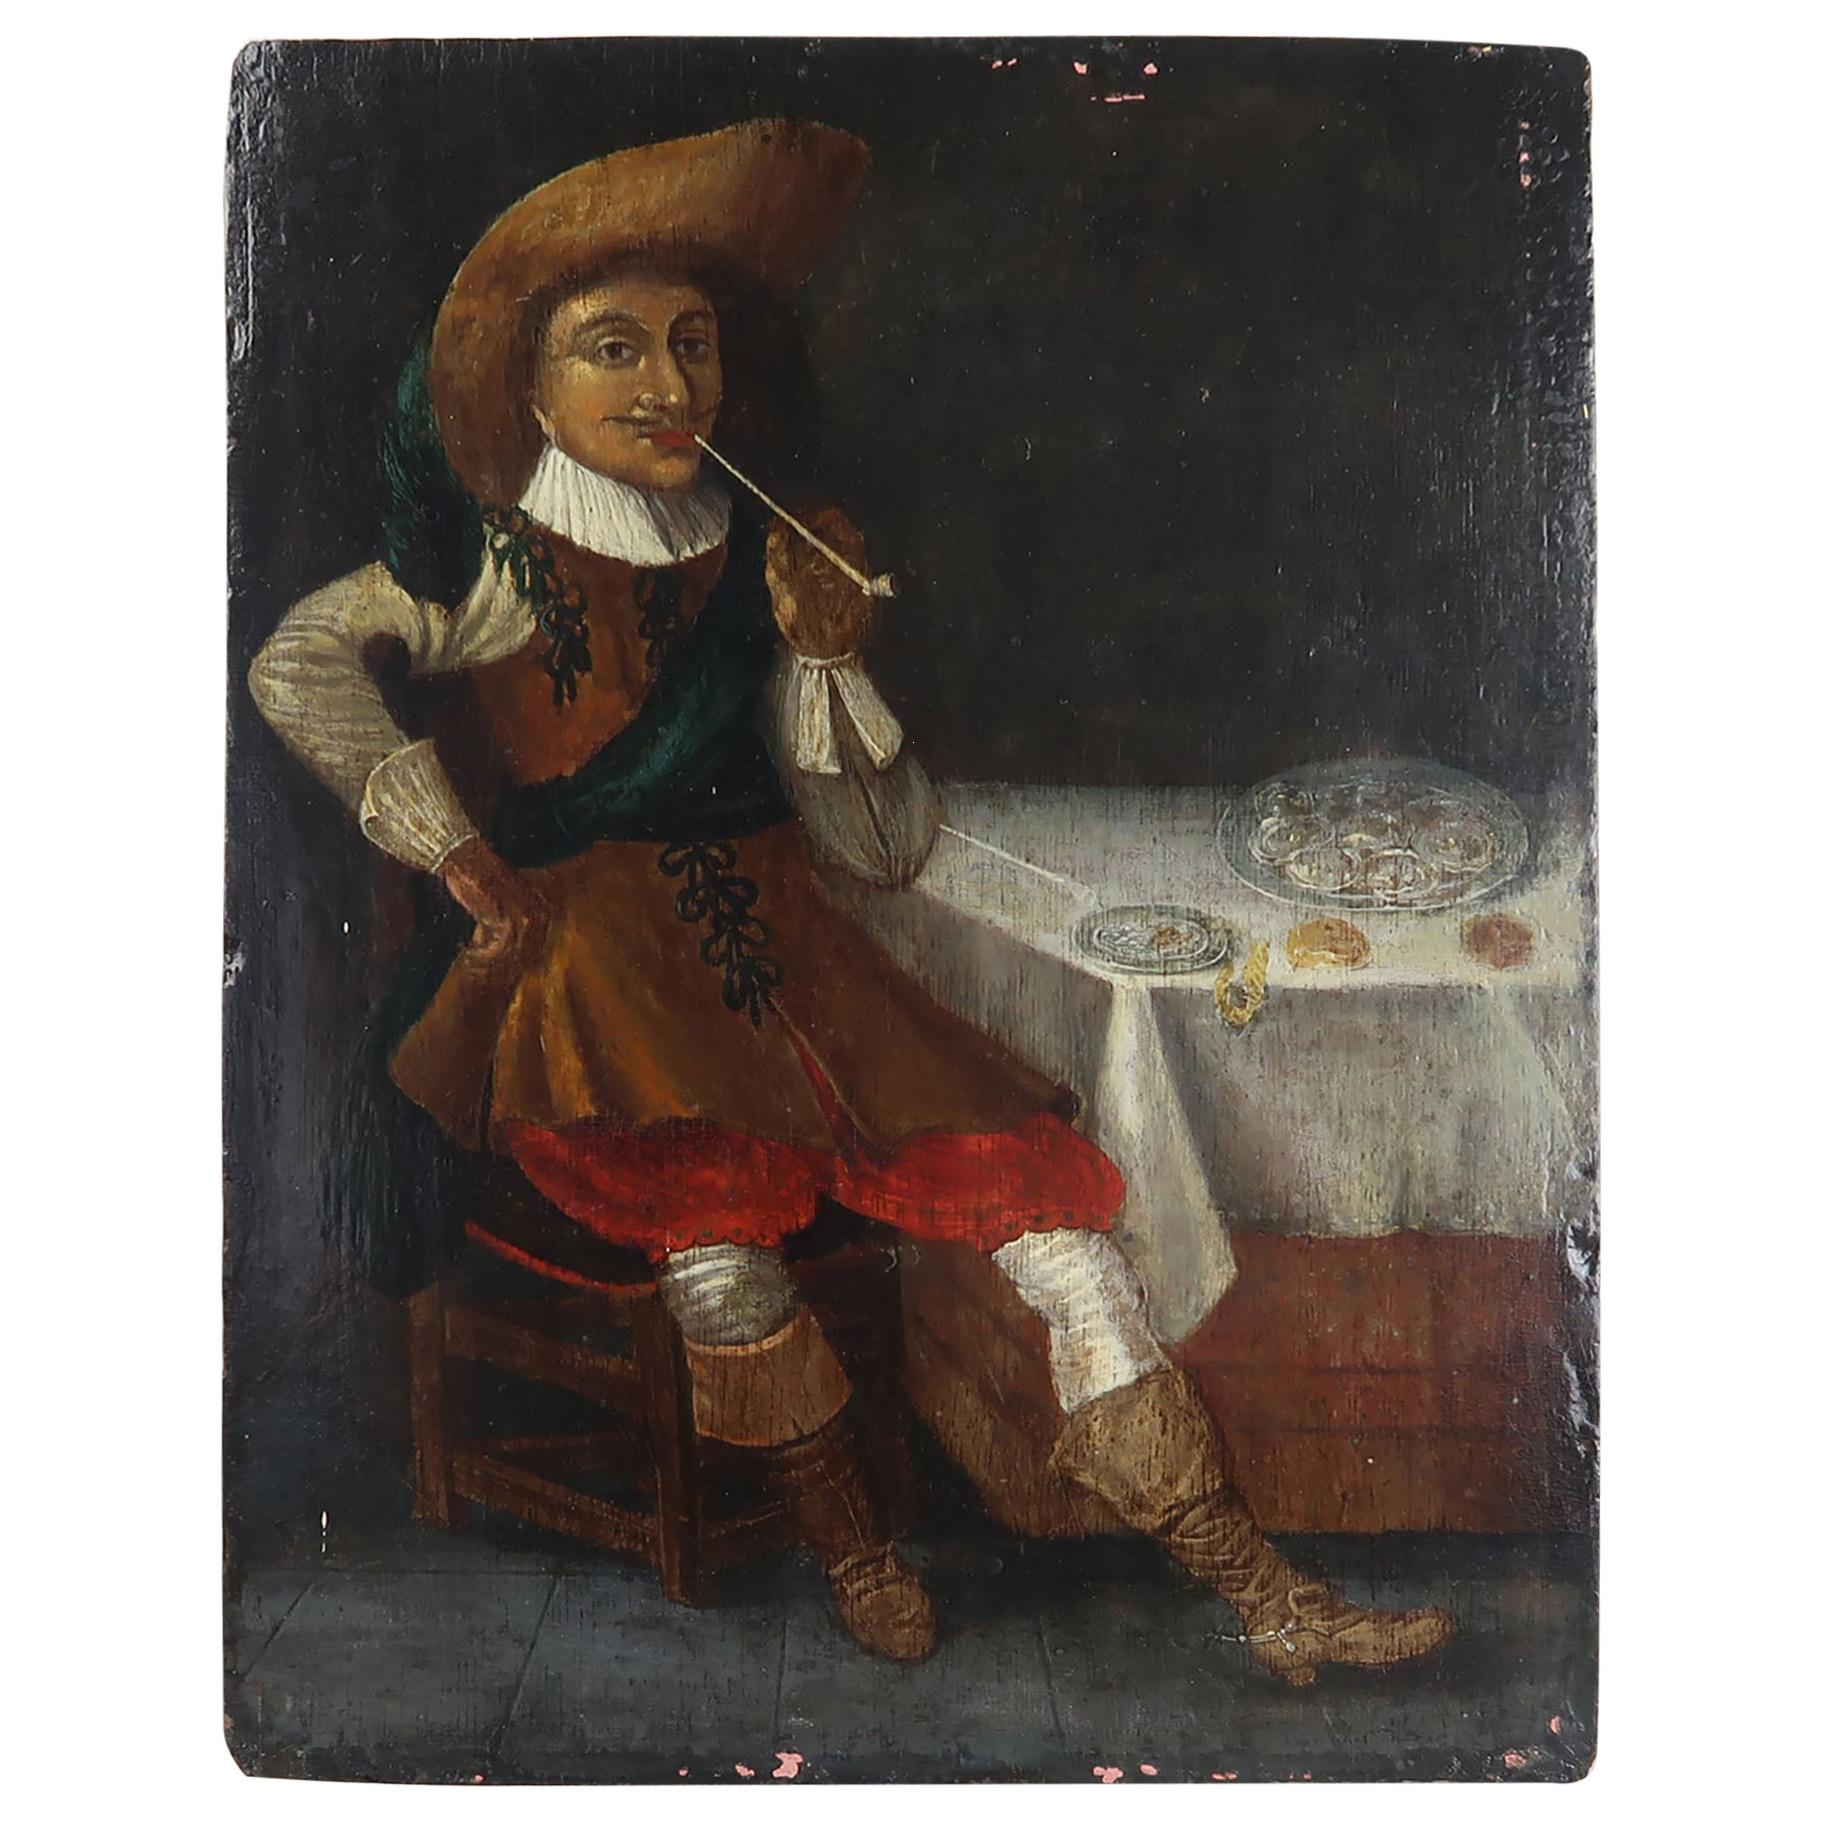 Naive Oil Painting of a Dutch Gentleman, 19th Century